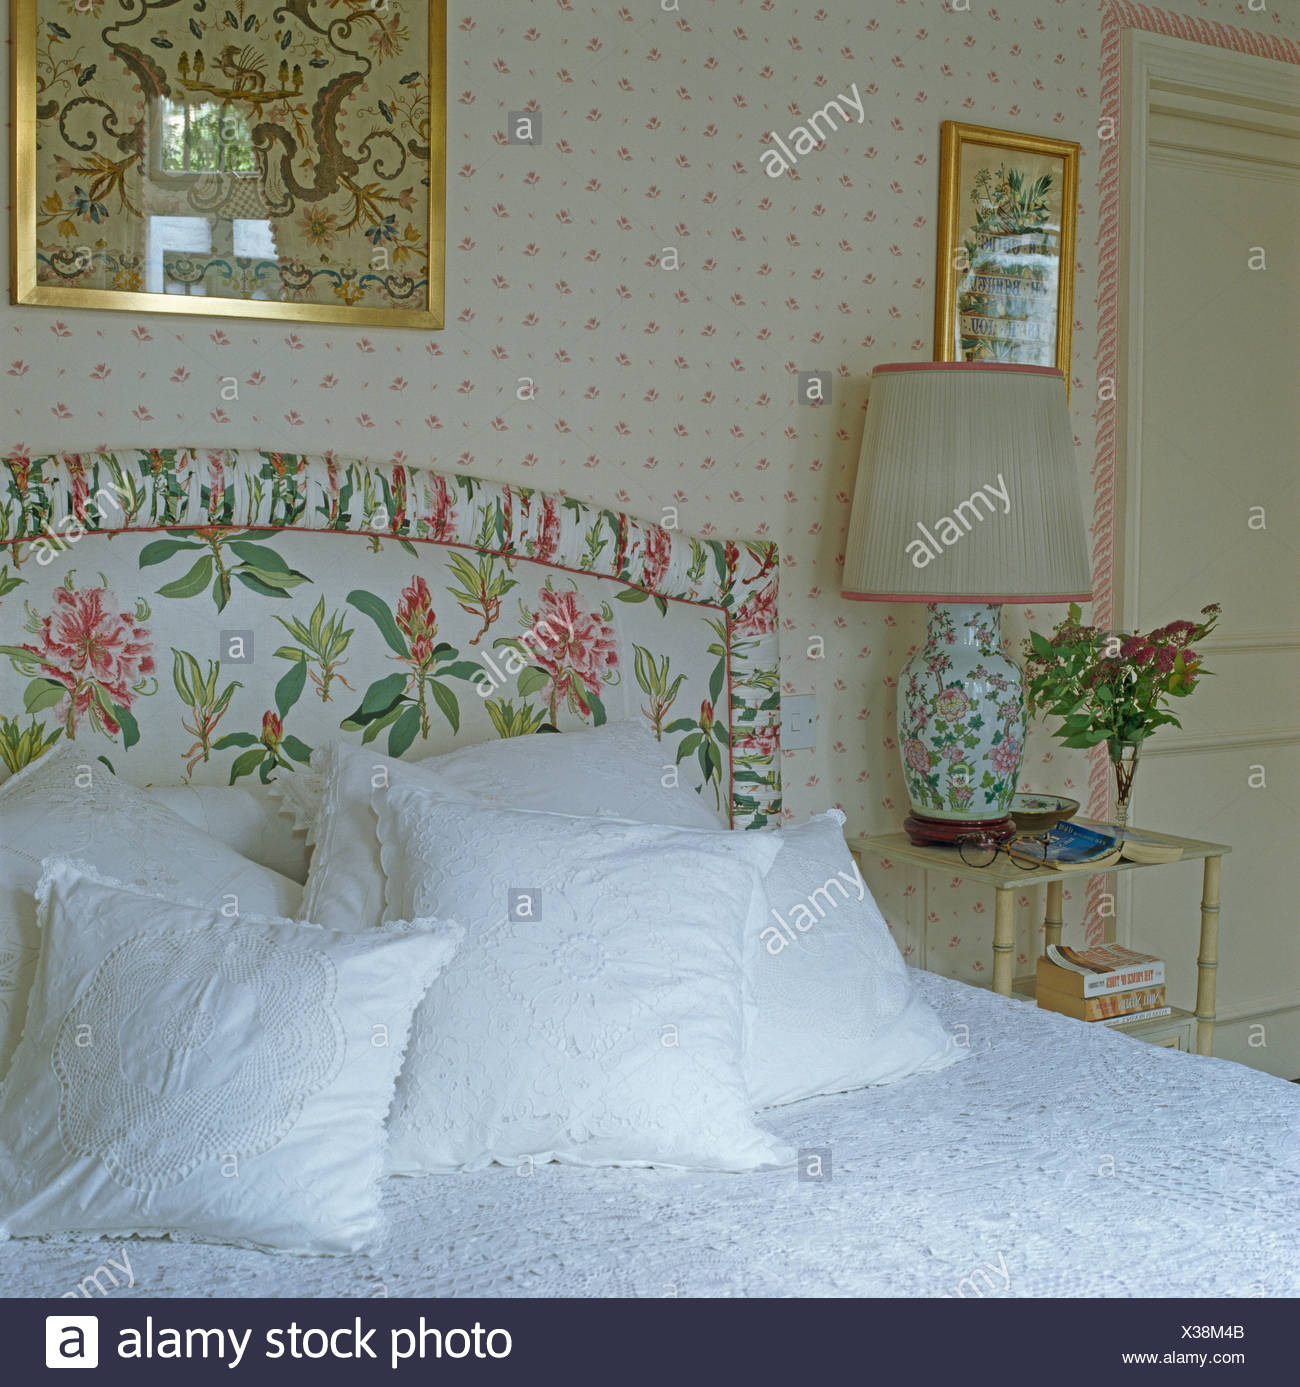 White Lace Edged Cushions On Bed With Upholstered Floral Headboard